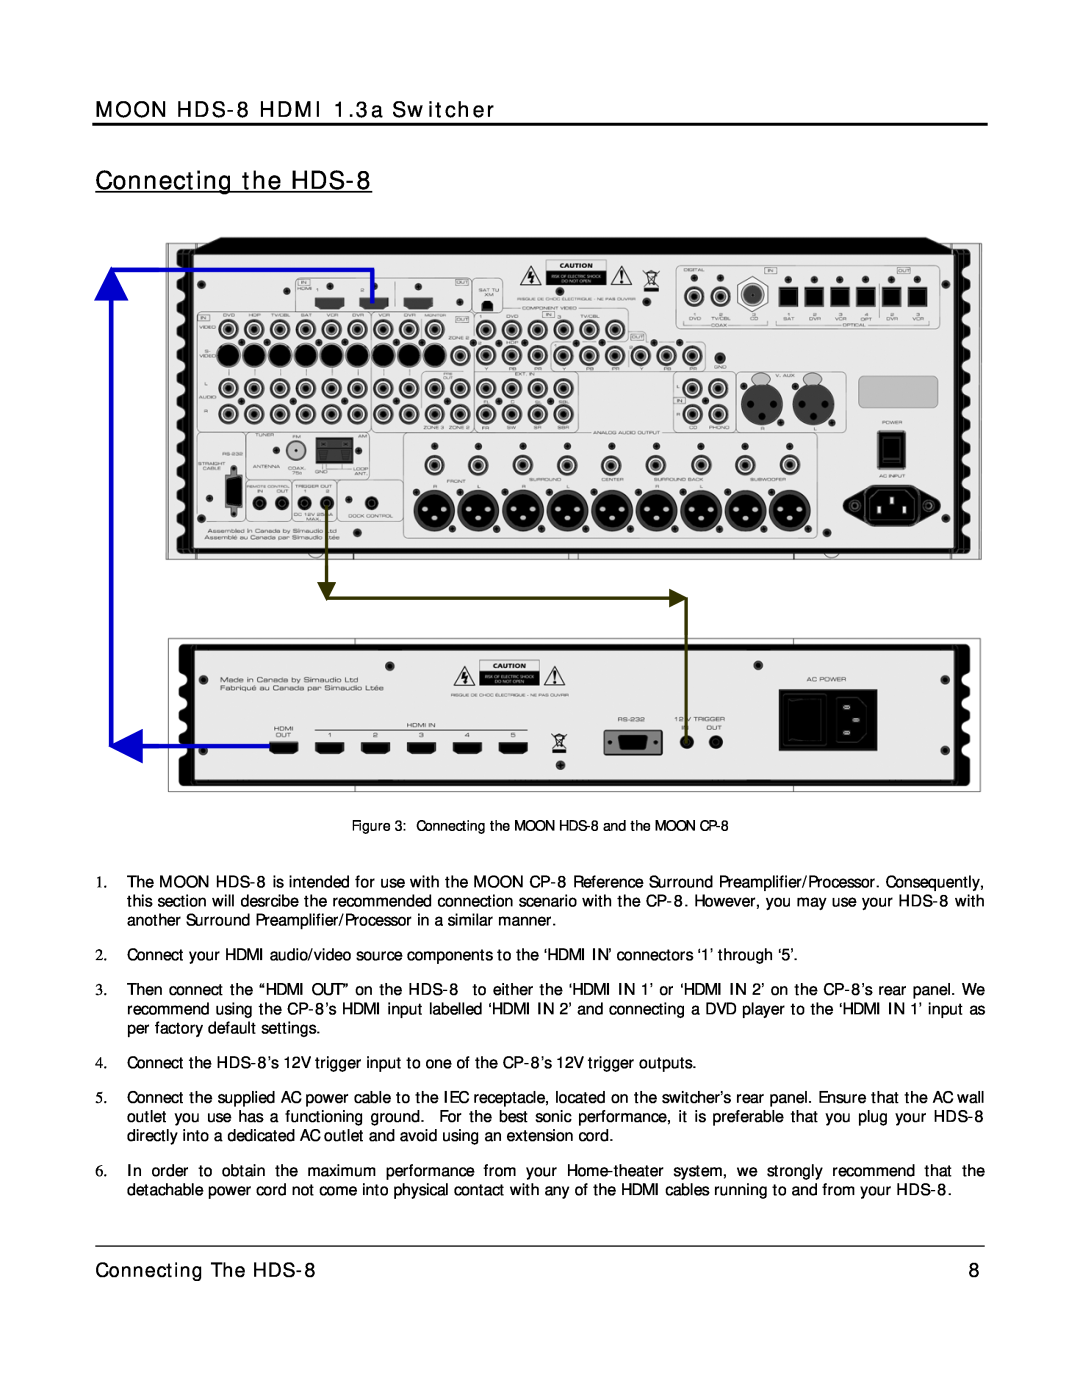 Simaudio owner manual Connecting the HDS-8, MOON HDS-8 HDMI 1.3a Switcher, Connecting The HDS-8 